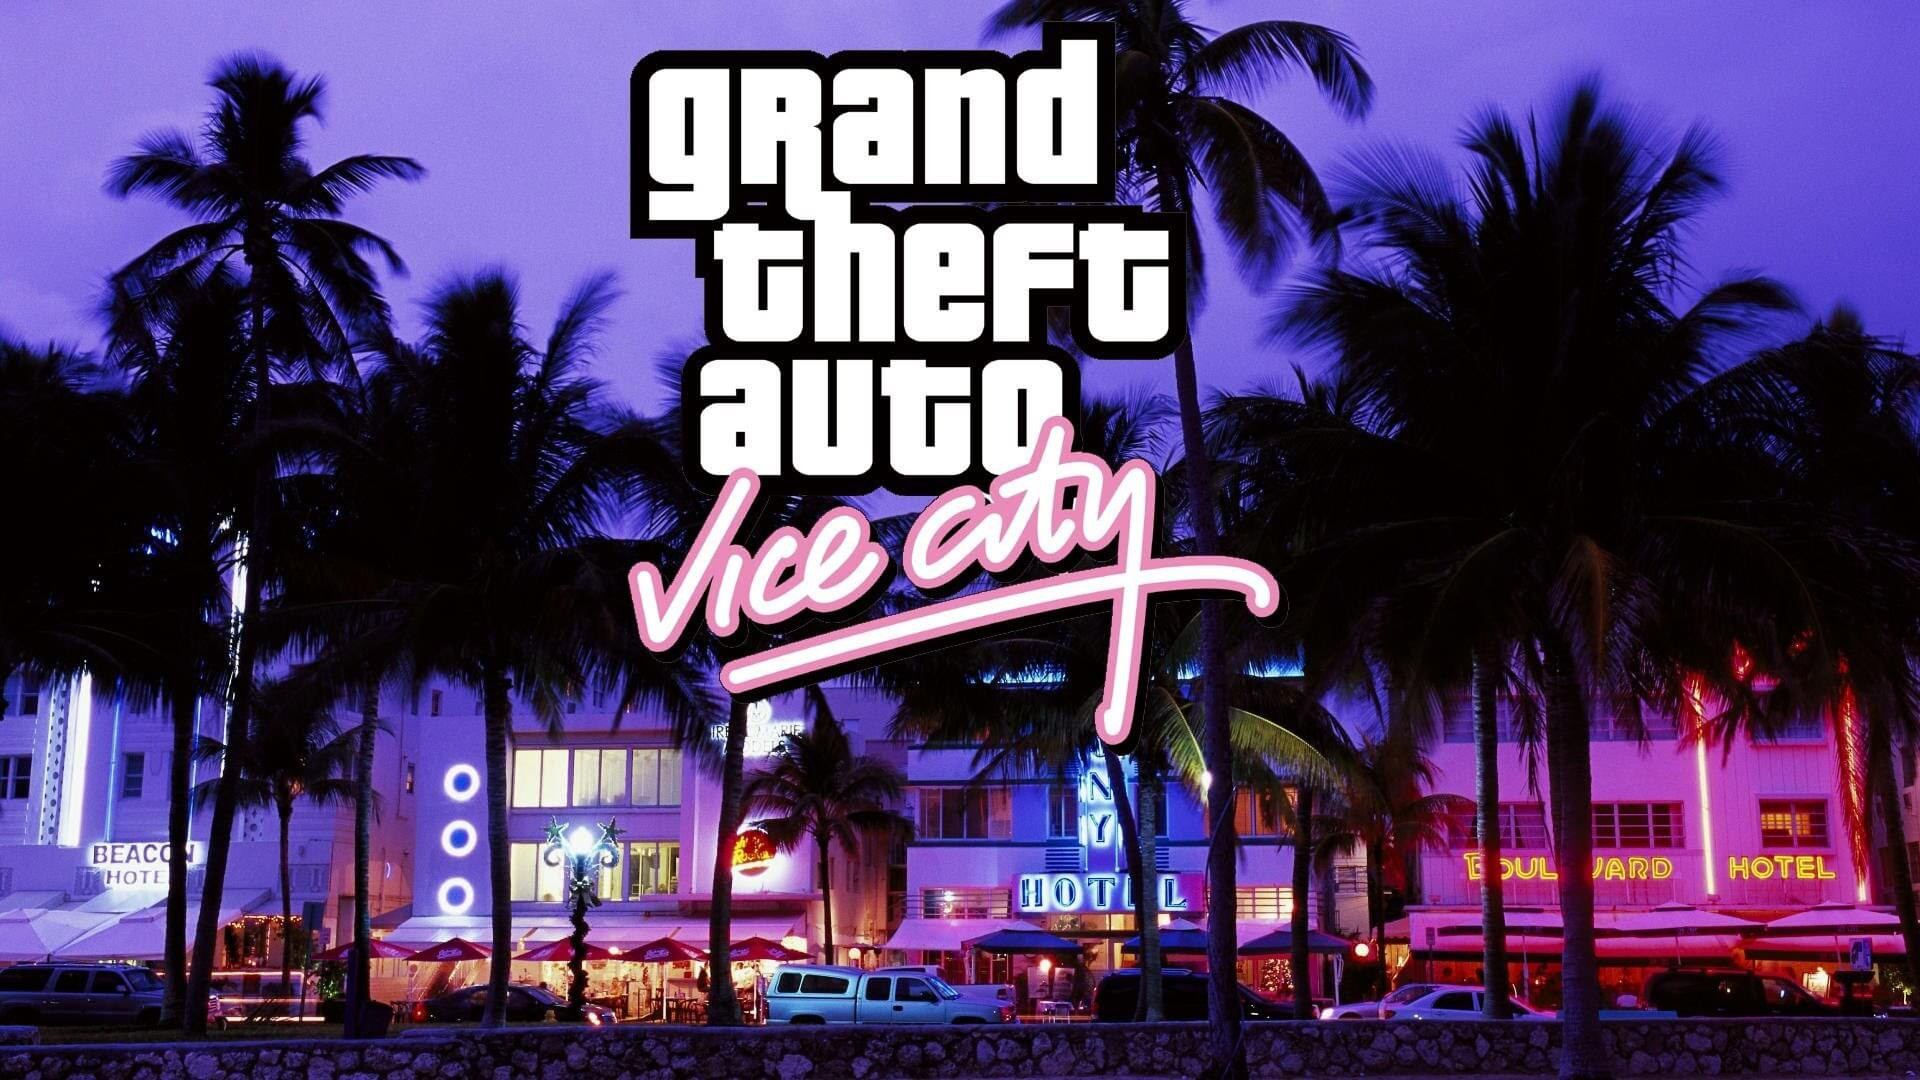 gta vice city 5 game free download full version for pc windows 10